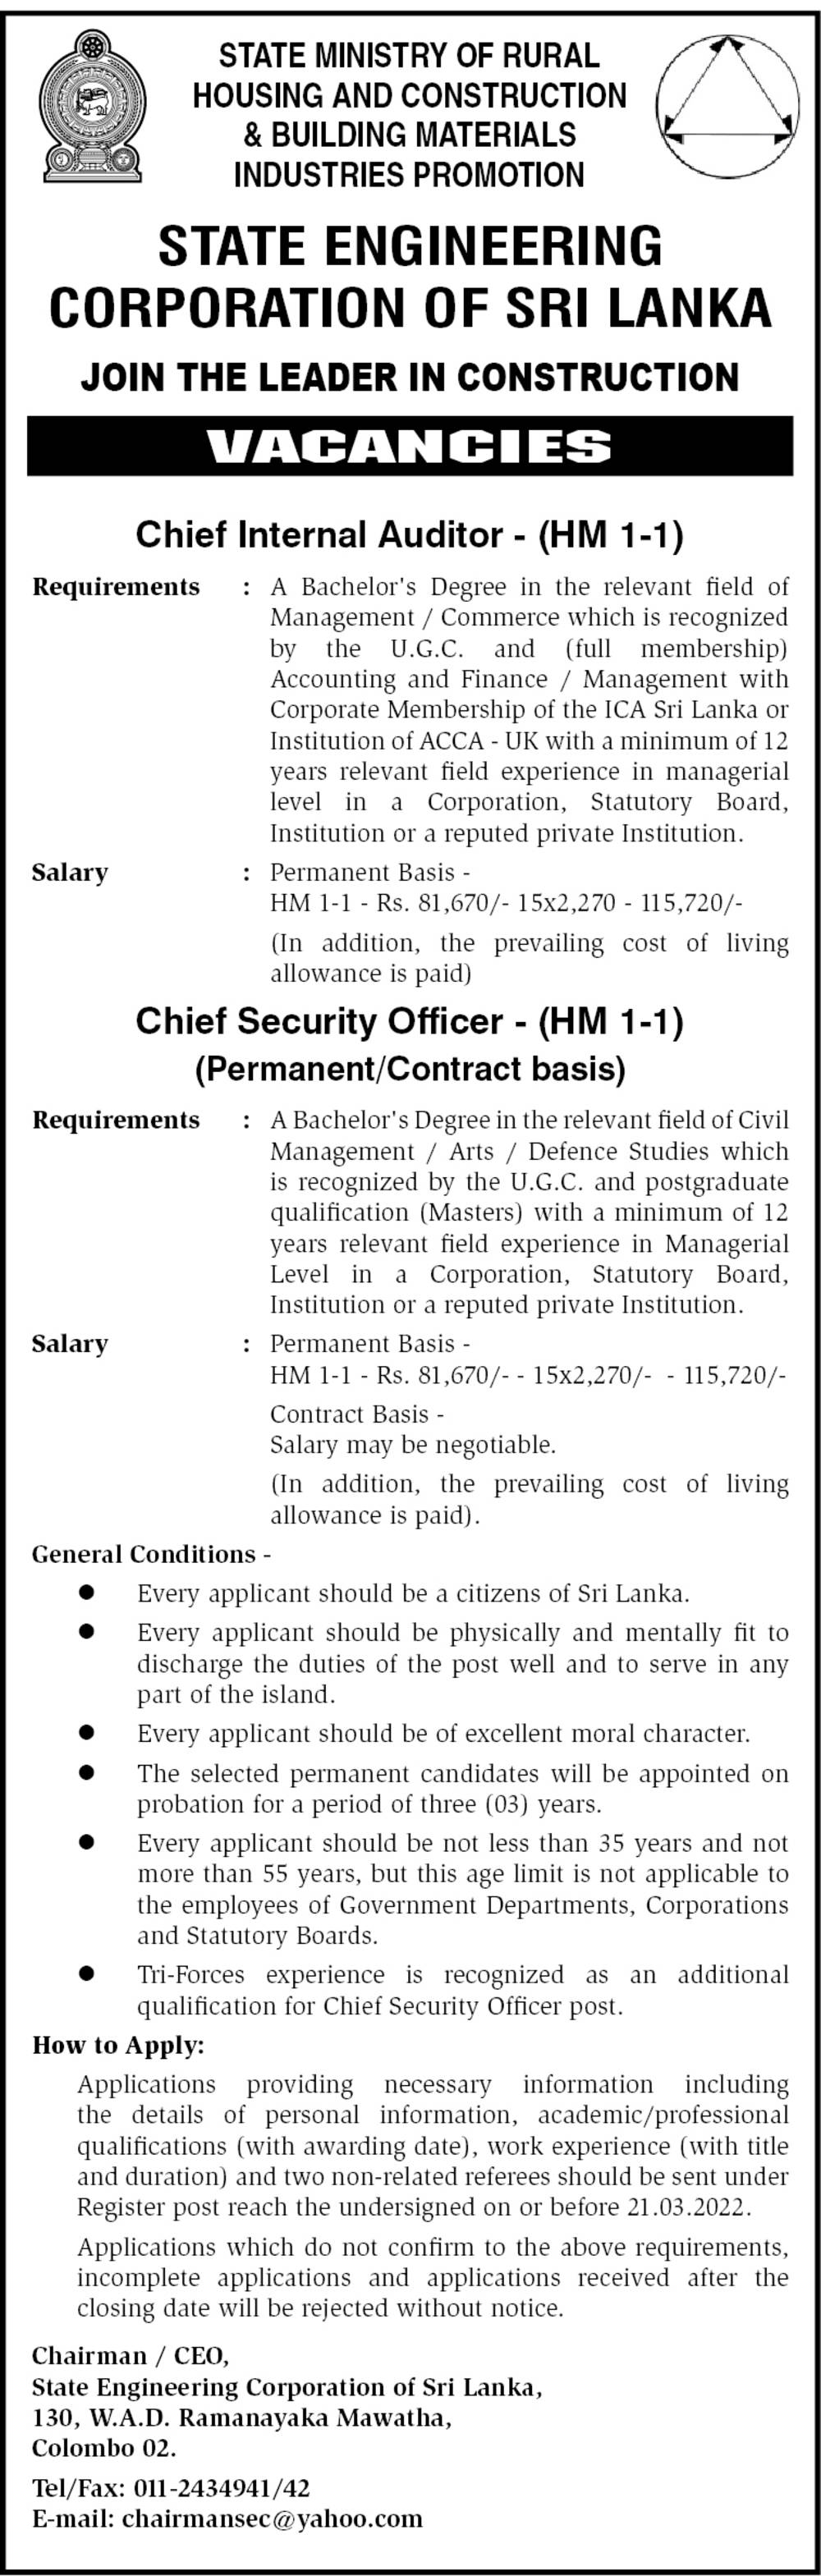 Chief Internal Auditor / Chief Security Officer - State Engineering Corporation